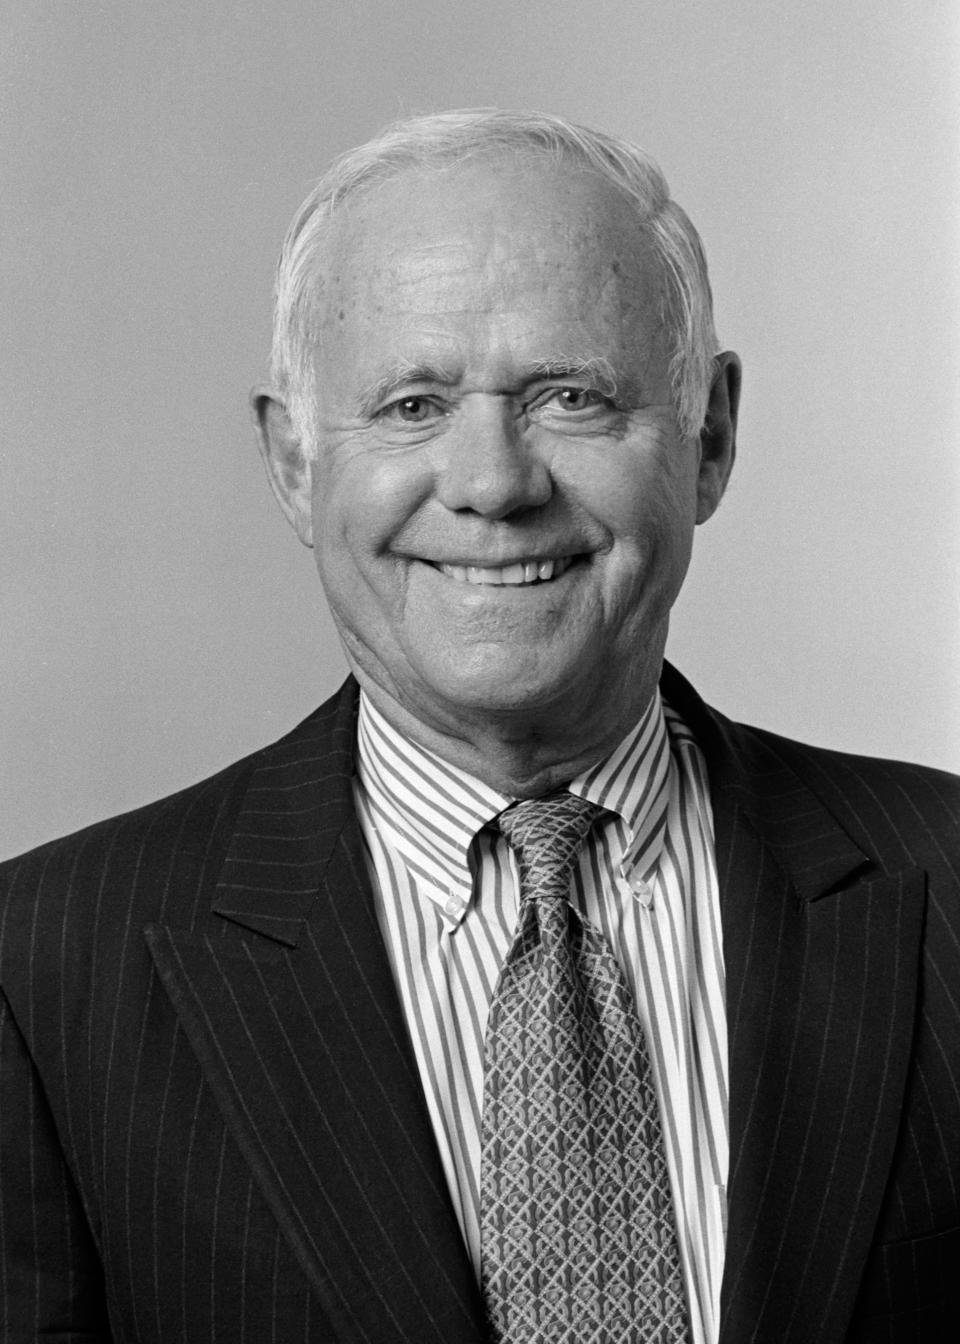 Former Johnson & Johnson CEO James E. Burke is seen in an August 2000 photo provided by Johnson & Johnson. Burke, who helped the company expand dramatically around the world and steered it through the Tylenol poisonings in the 1980s, died on Friday, Sept. 28. He was 87. (AP Photo/PR Newsfoto, Camera1 NYC)